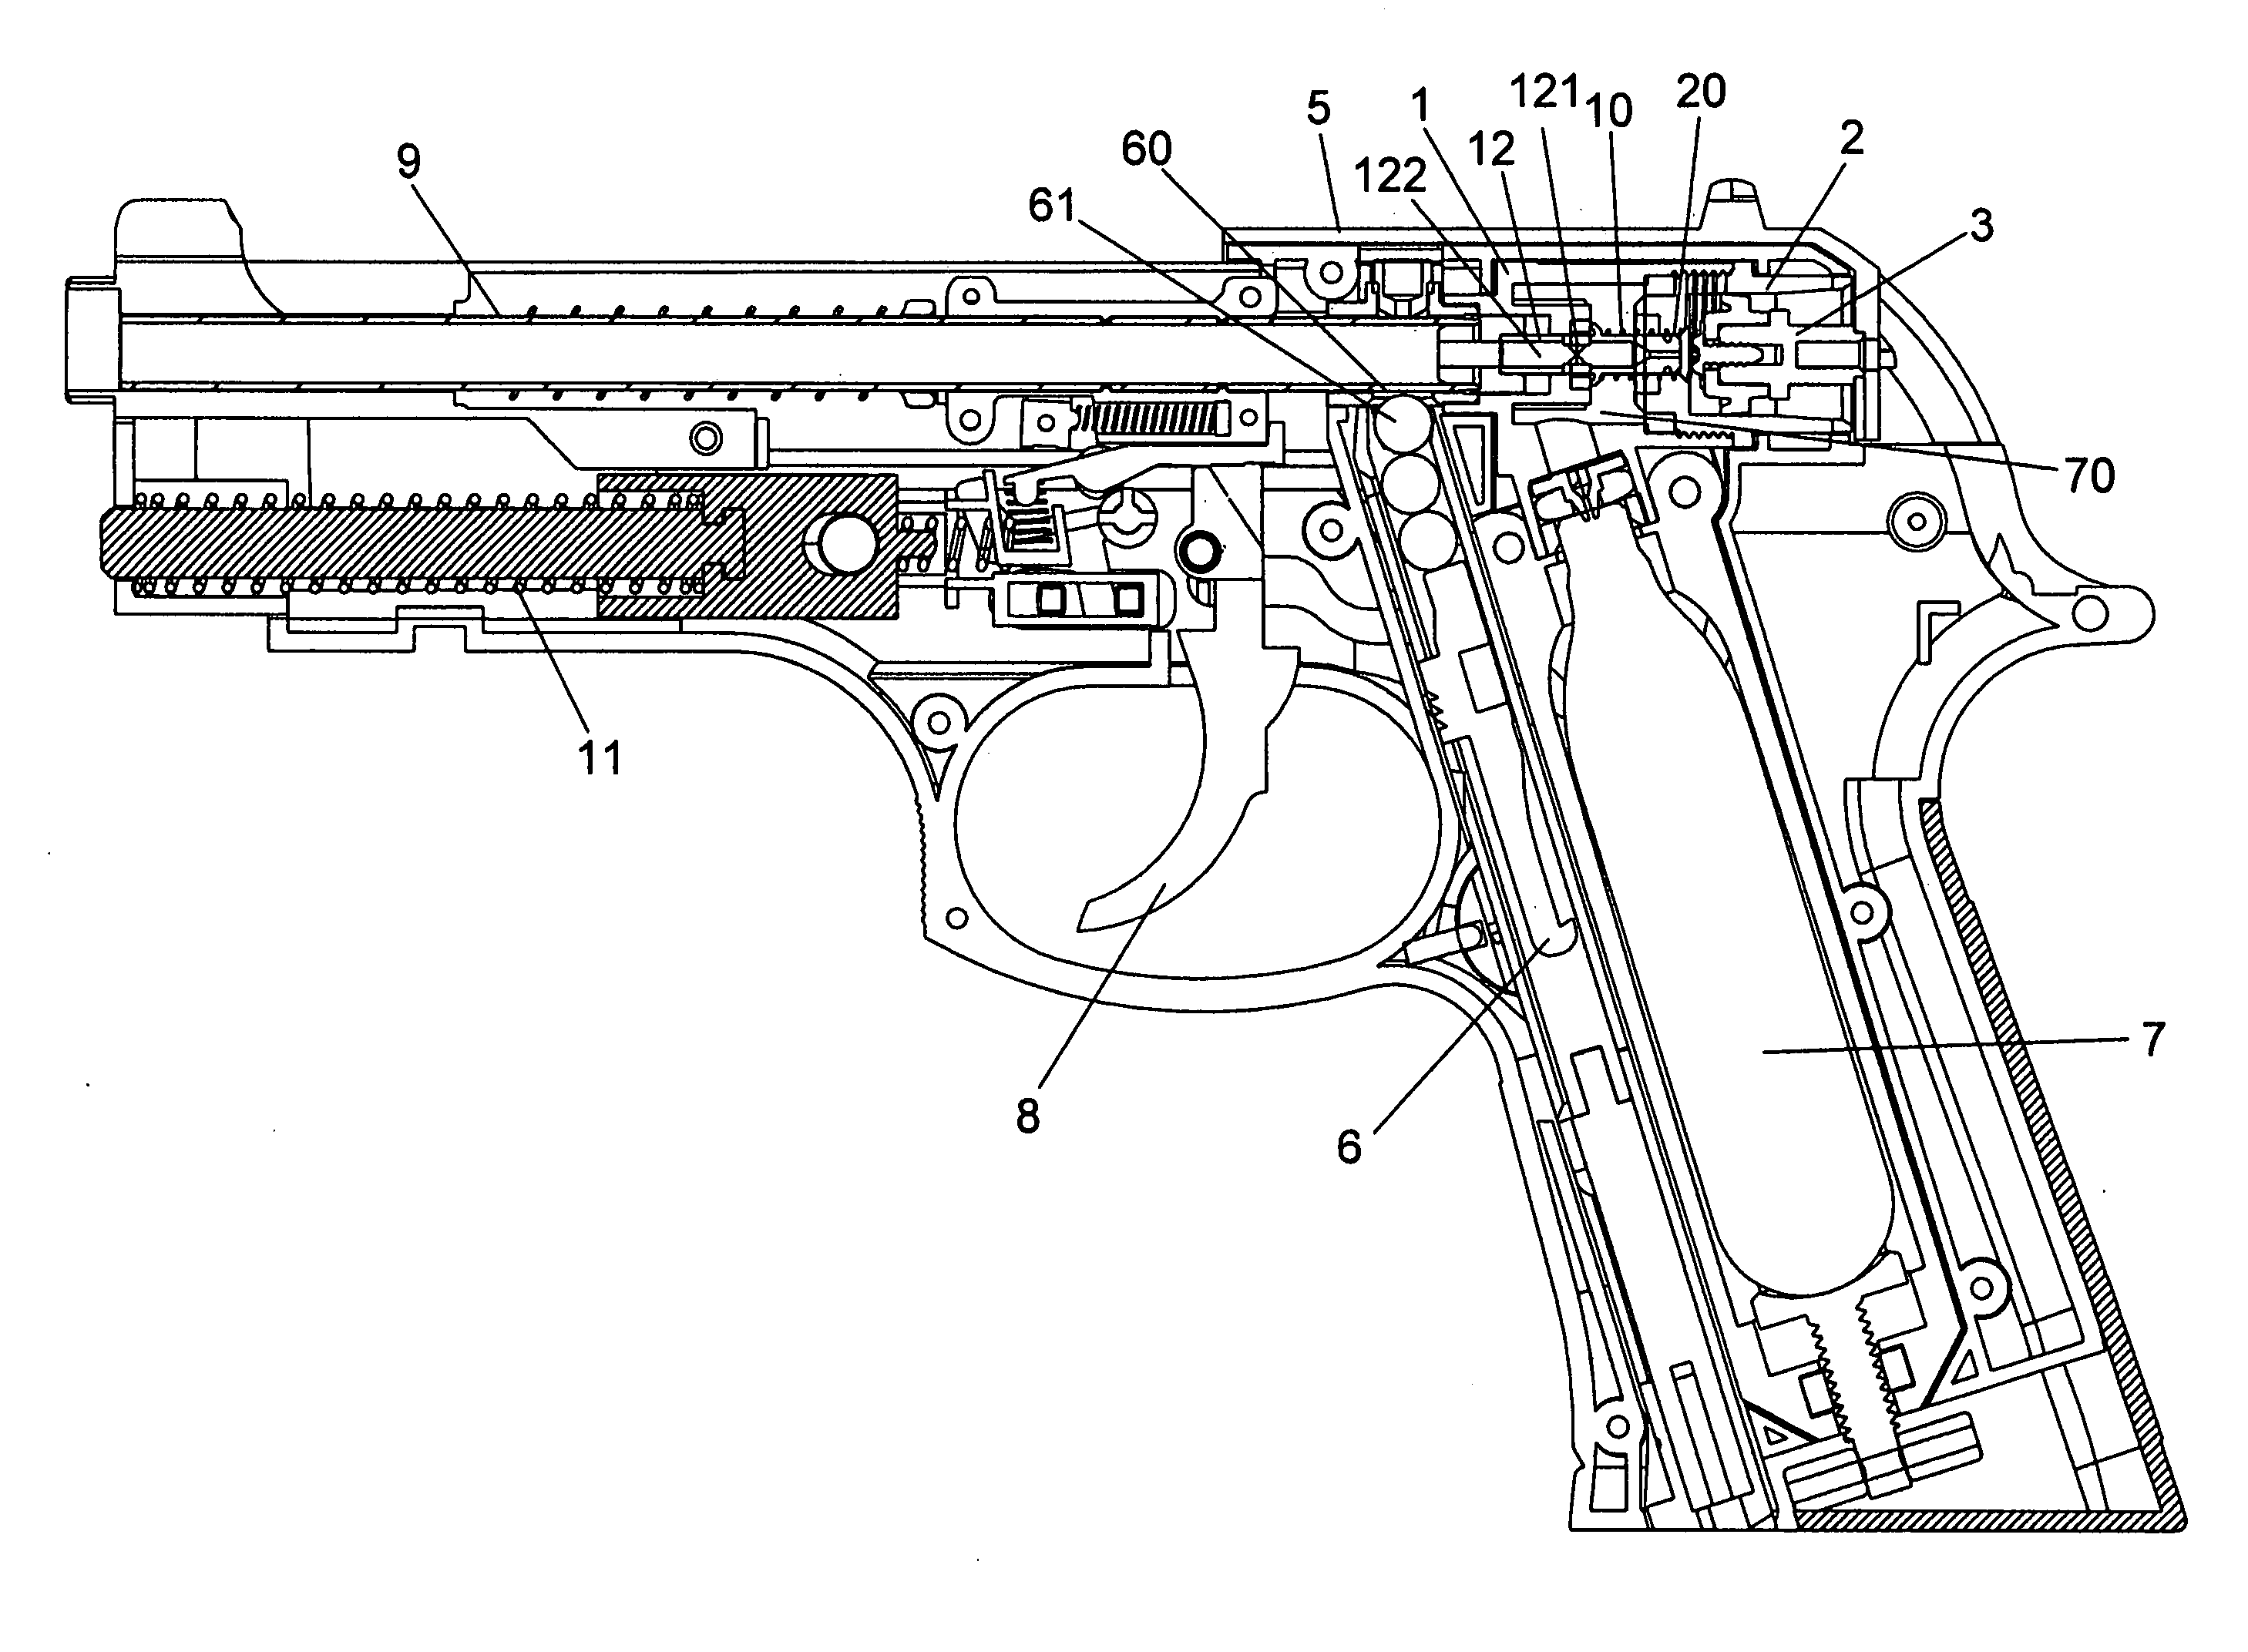 Continuous firing type trigger structure for toy gun